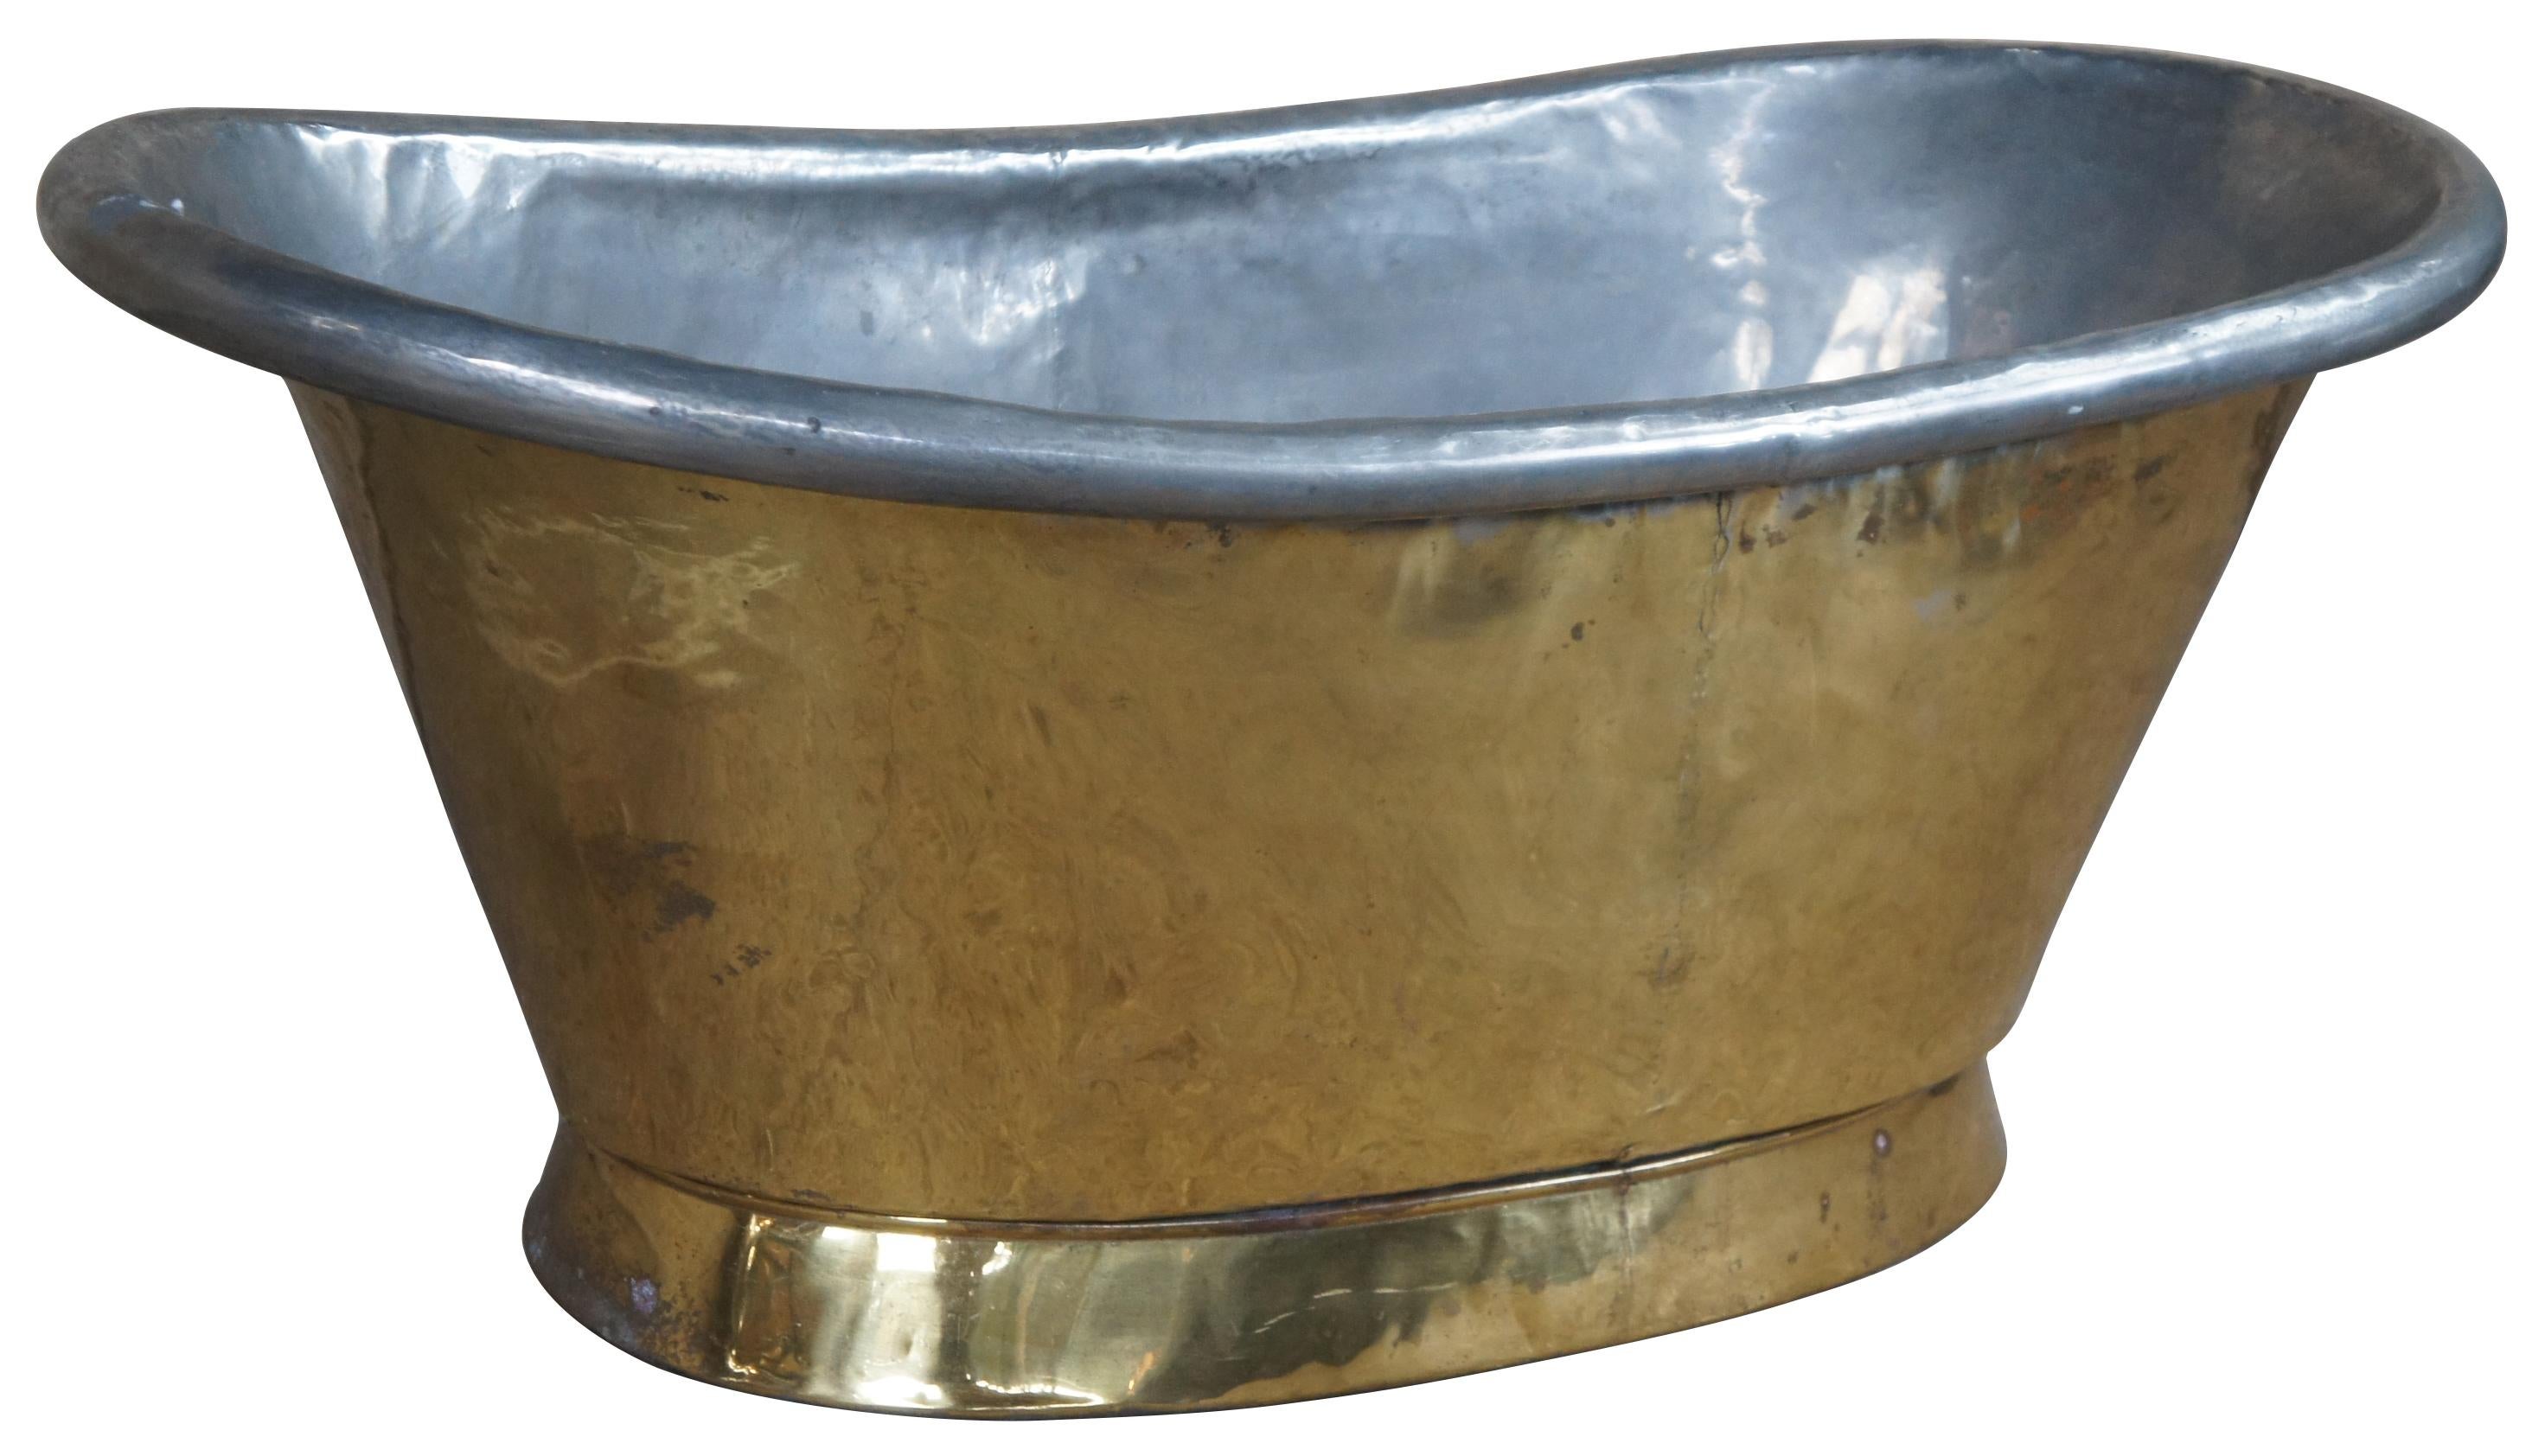 The perfect conversation piece for any party or event. This beautiful Brass & Zink beverage tub is in the form of an antique bathtub. Perfect for wine, beer, liquor and water. The large size would allows it to also be used to bathe small children or